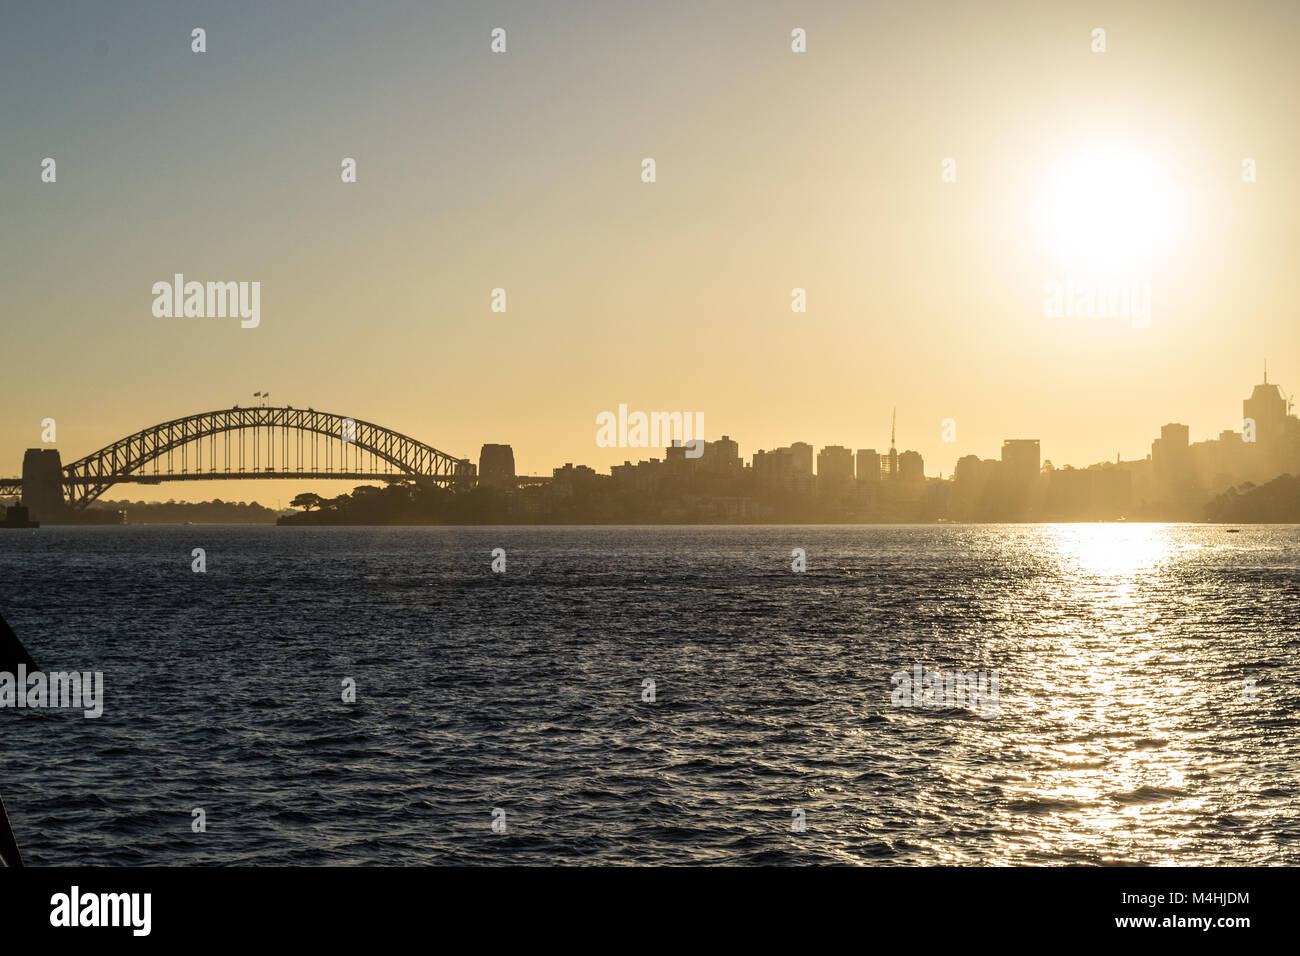 From Watsons bay to CBD in Sydney Stock Photo